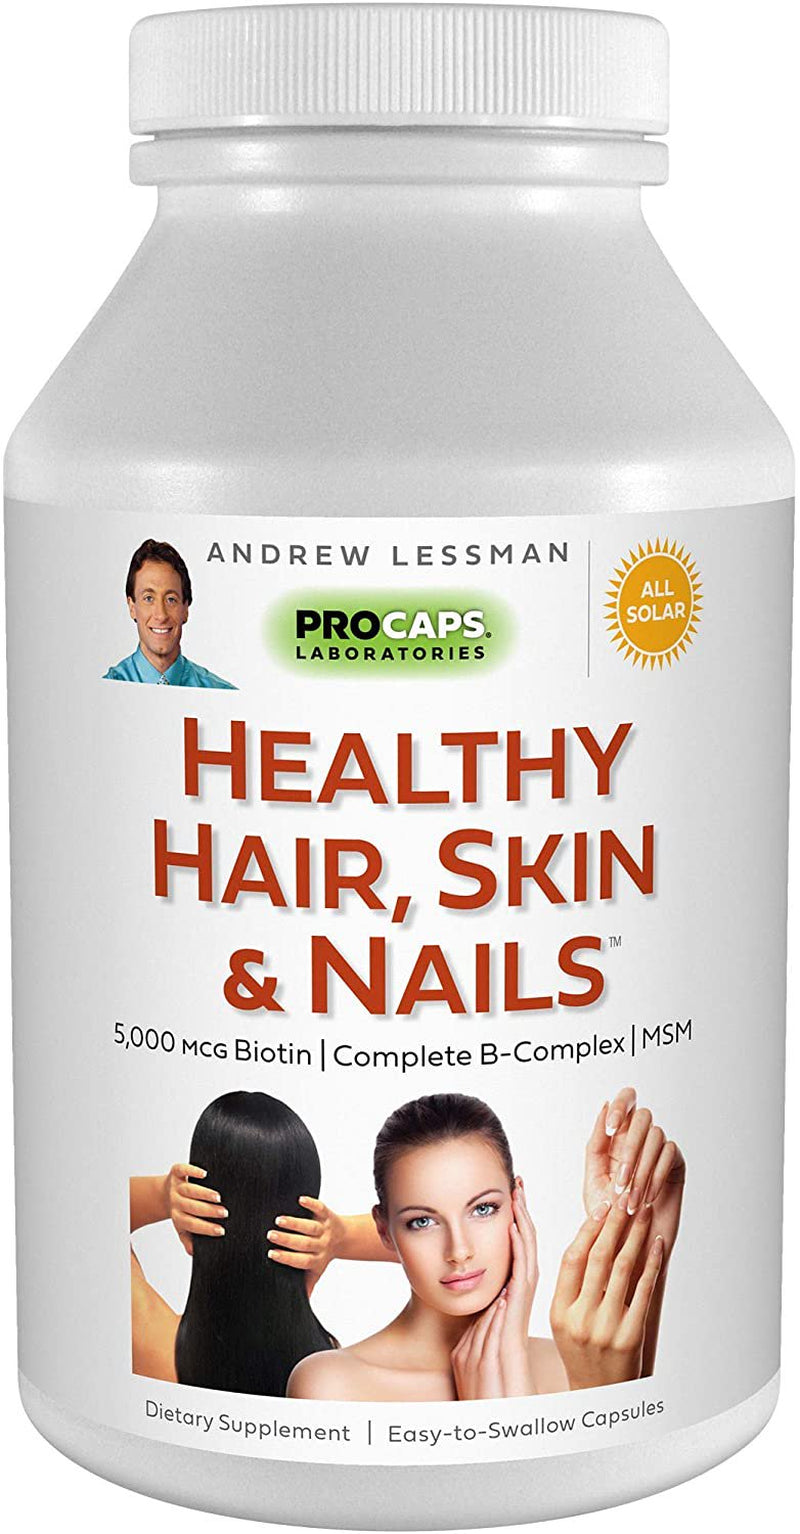 Andrew Lessman Healthy Hair, Skin & Nails 240 Capsules – 5000 Mcg High Bioactivity Biotin, MSM, Full B-Complex Promotes Beautiful Hair, Skin and Strong Nails - No Additives. Easy to Swallow Capsules